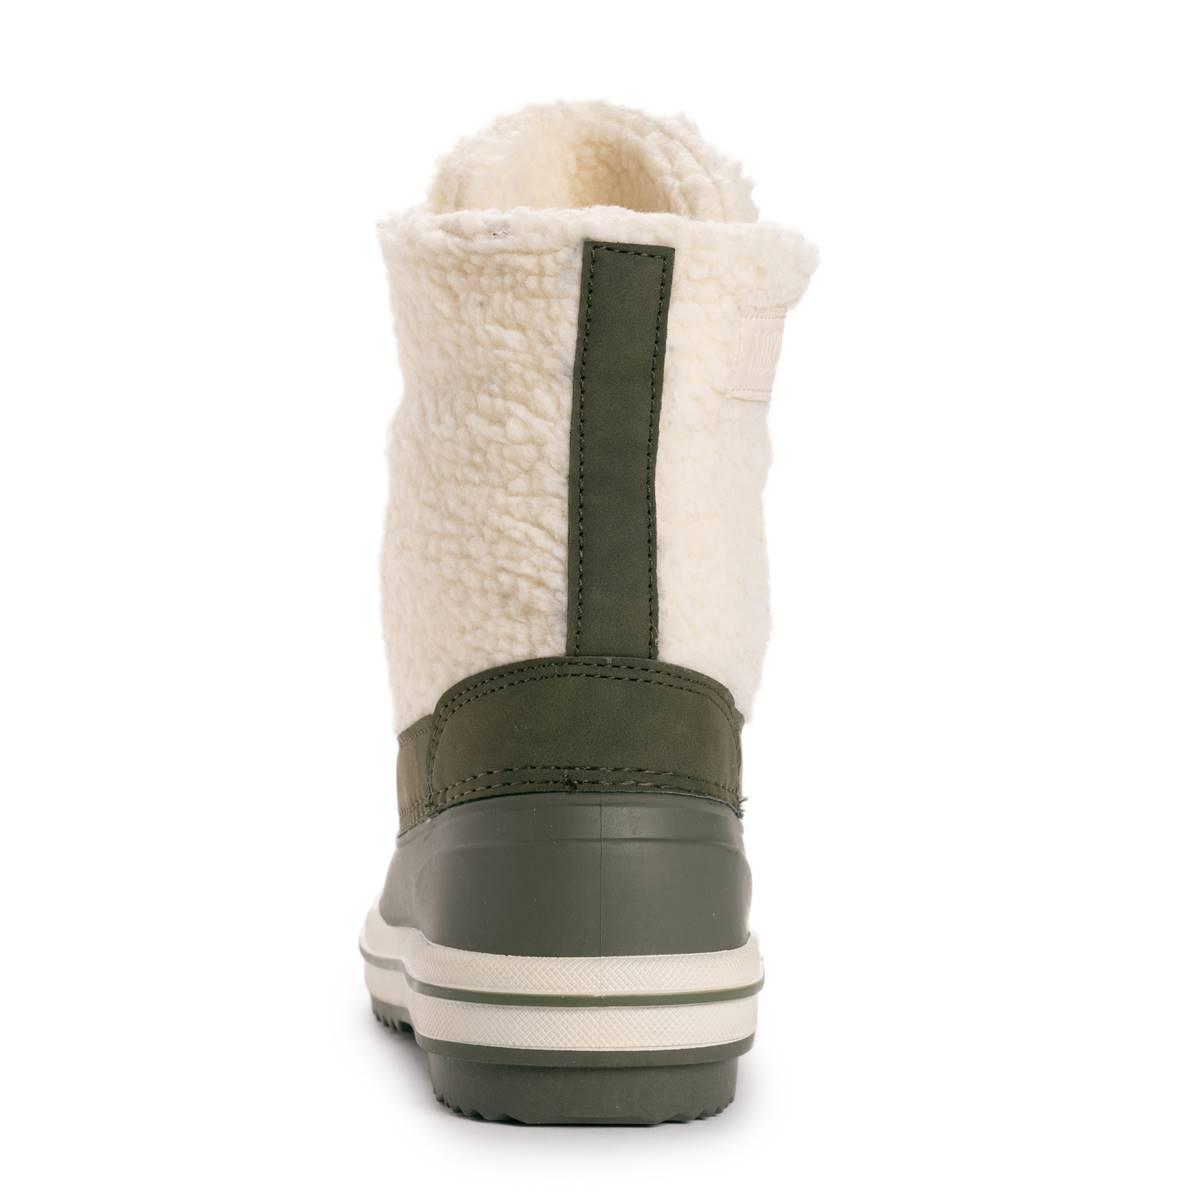 Womens MUK LUKS(R) Kinsley Kendall Winter Boots Product Image